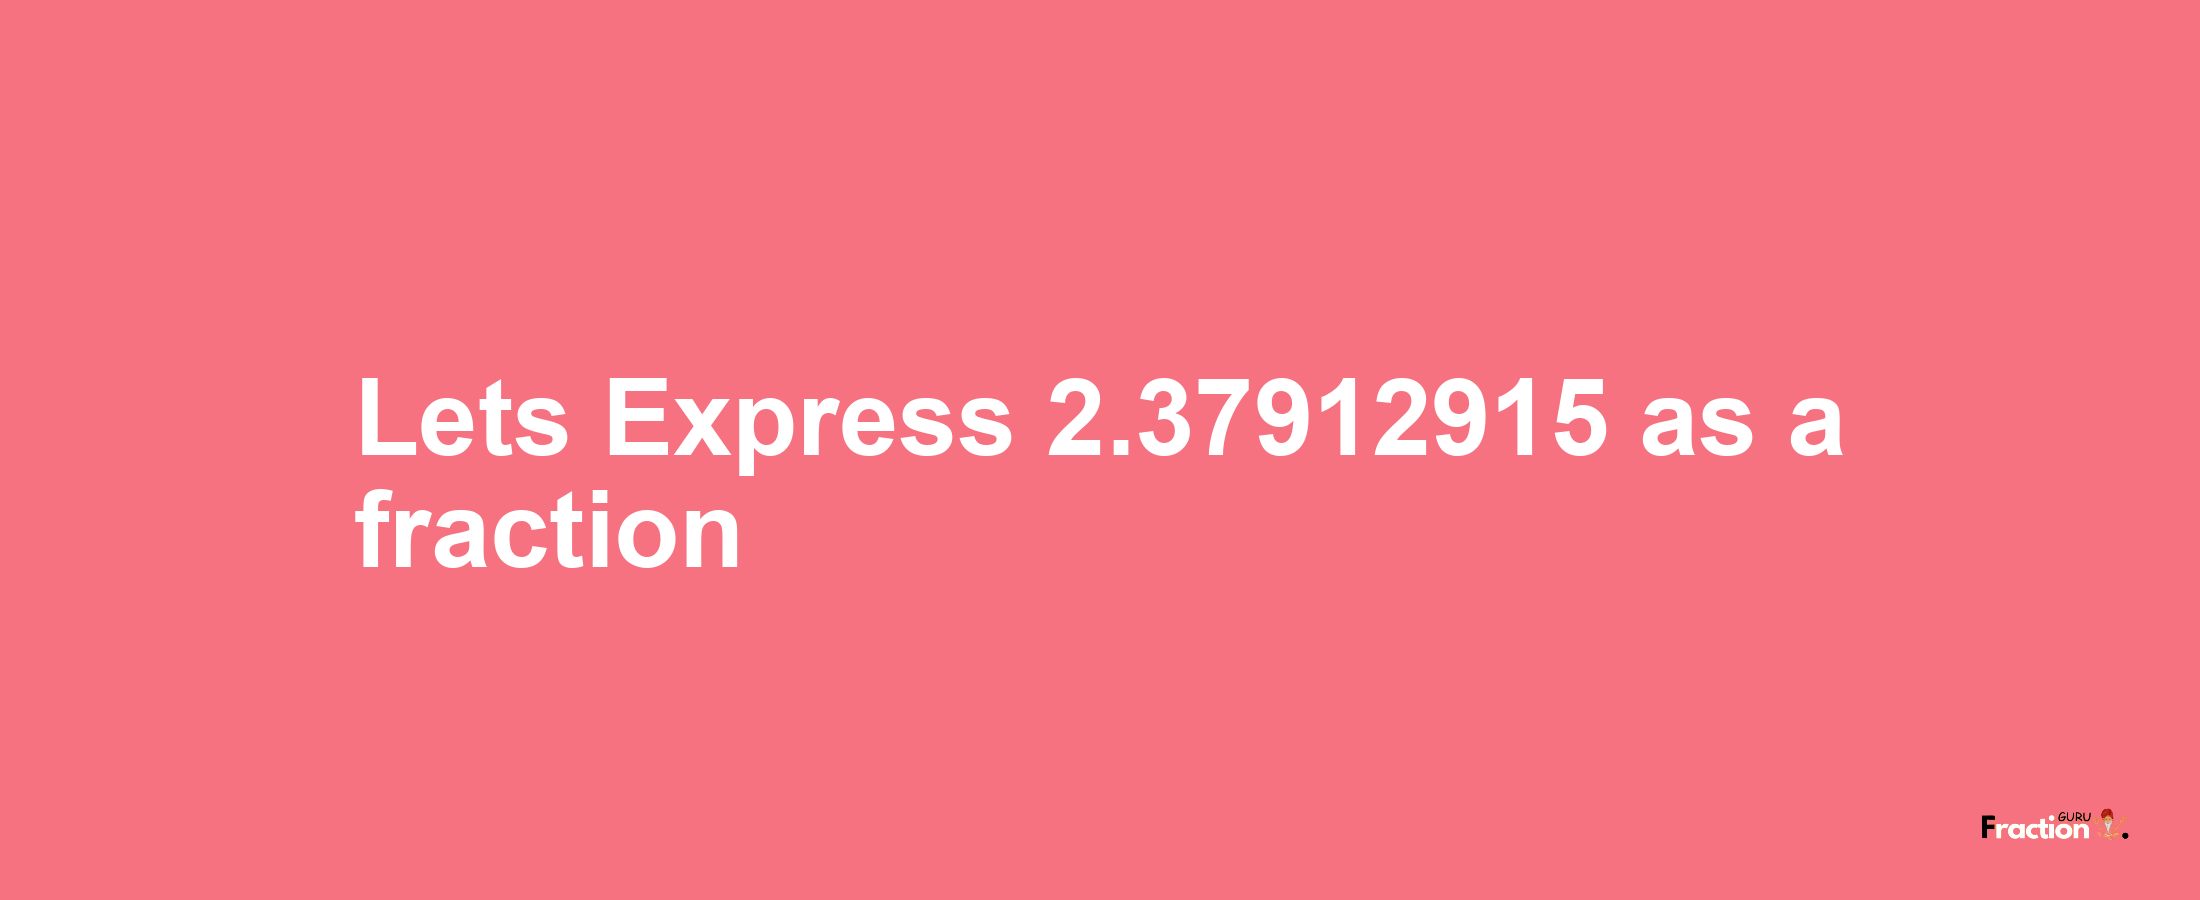 Lets Express 2.37912915 as afraction